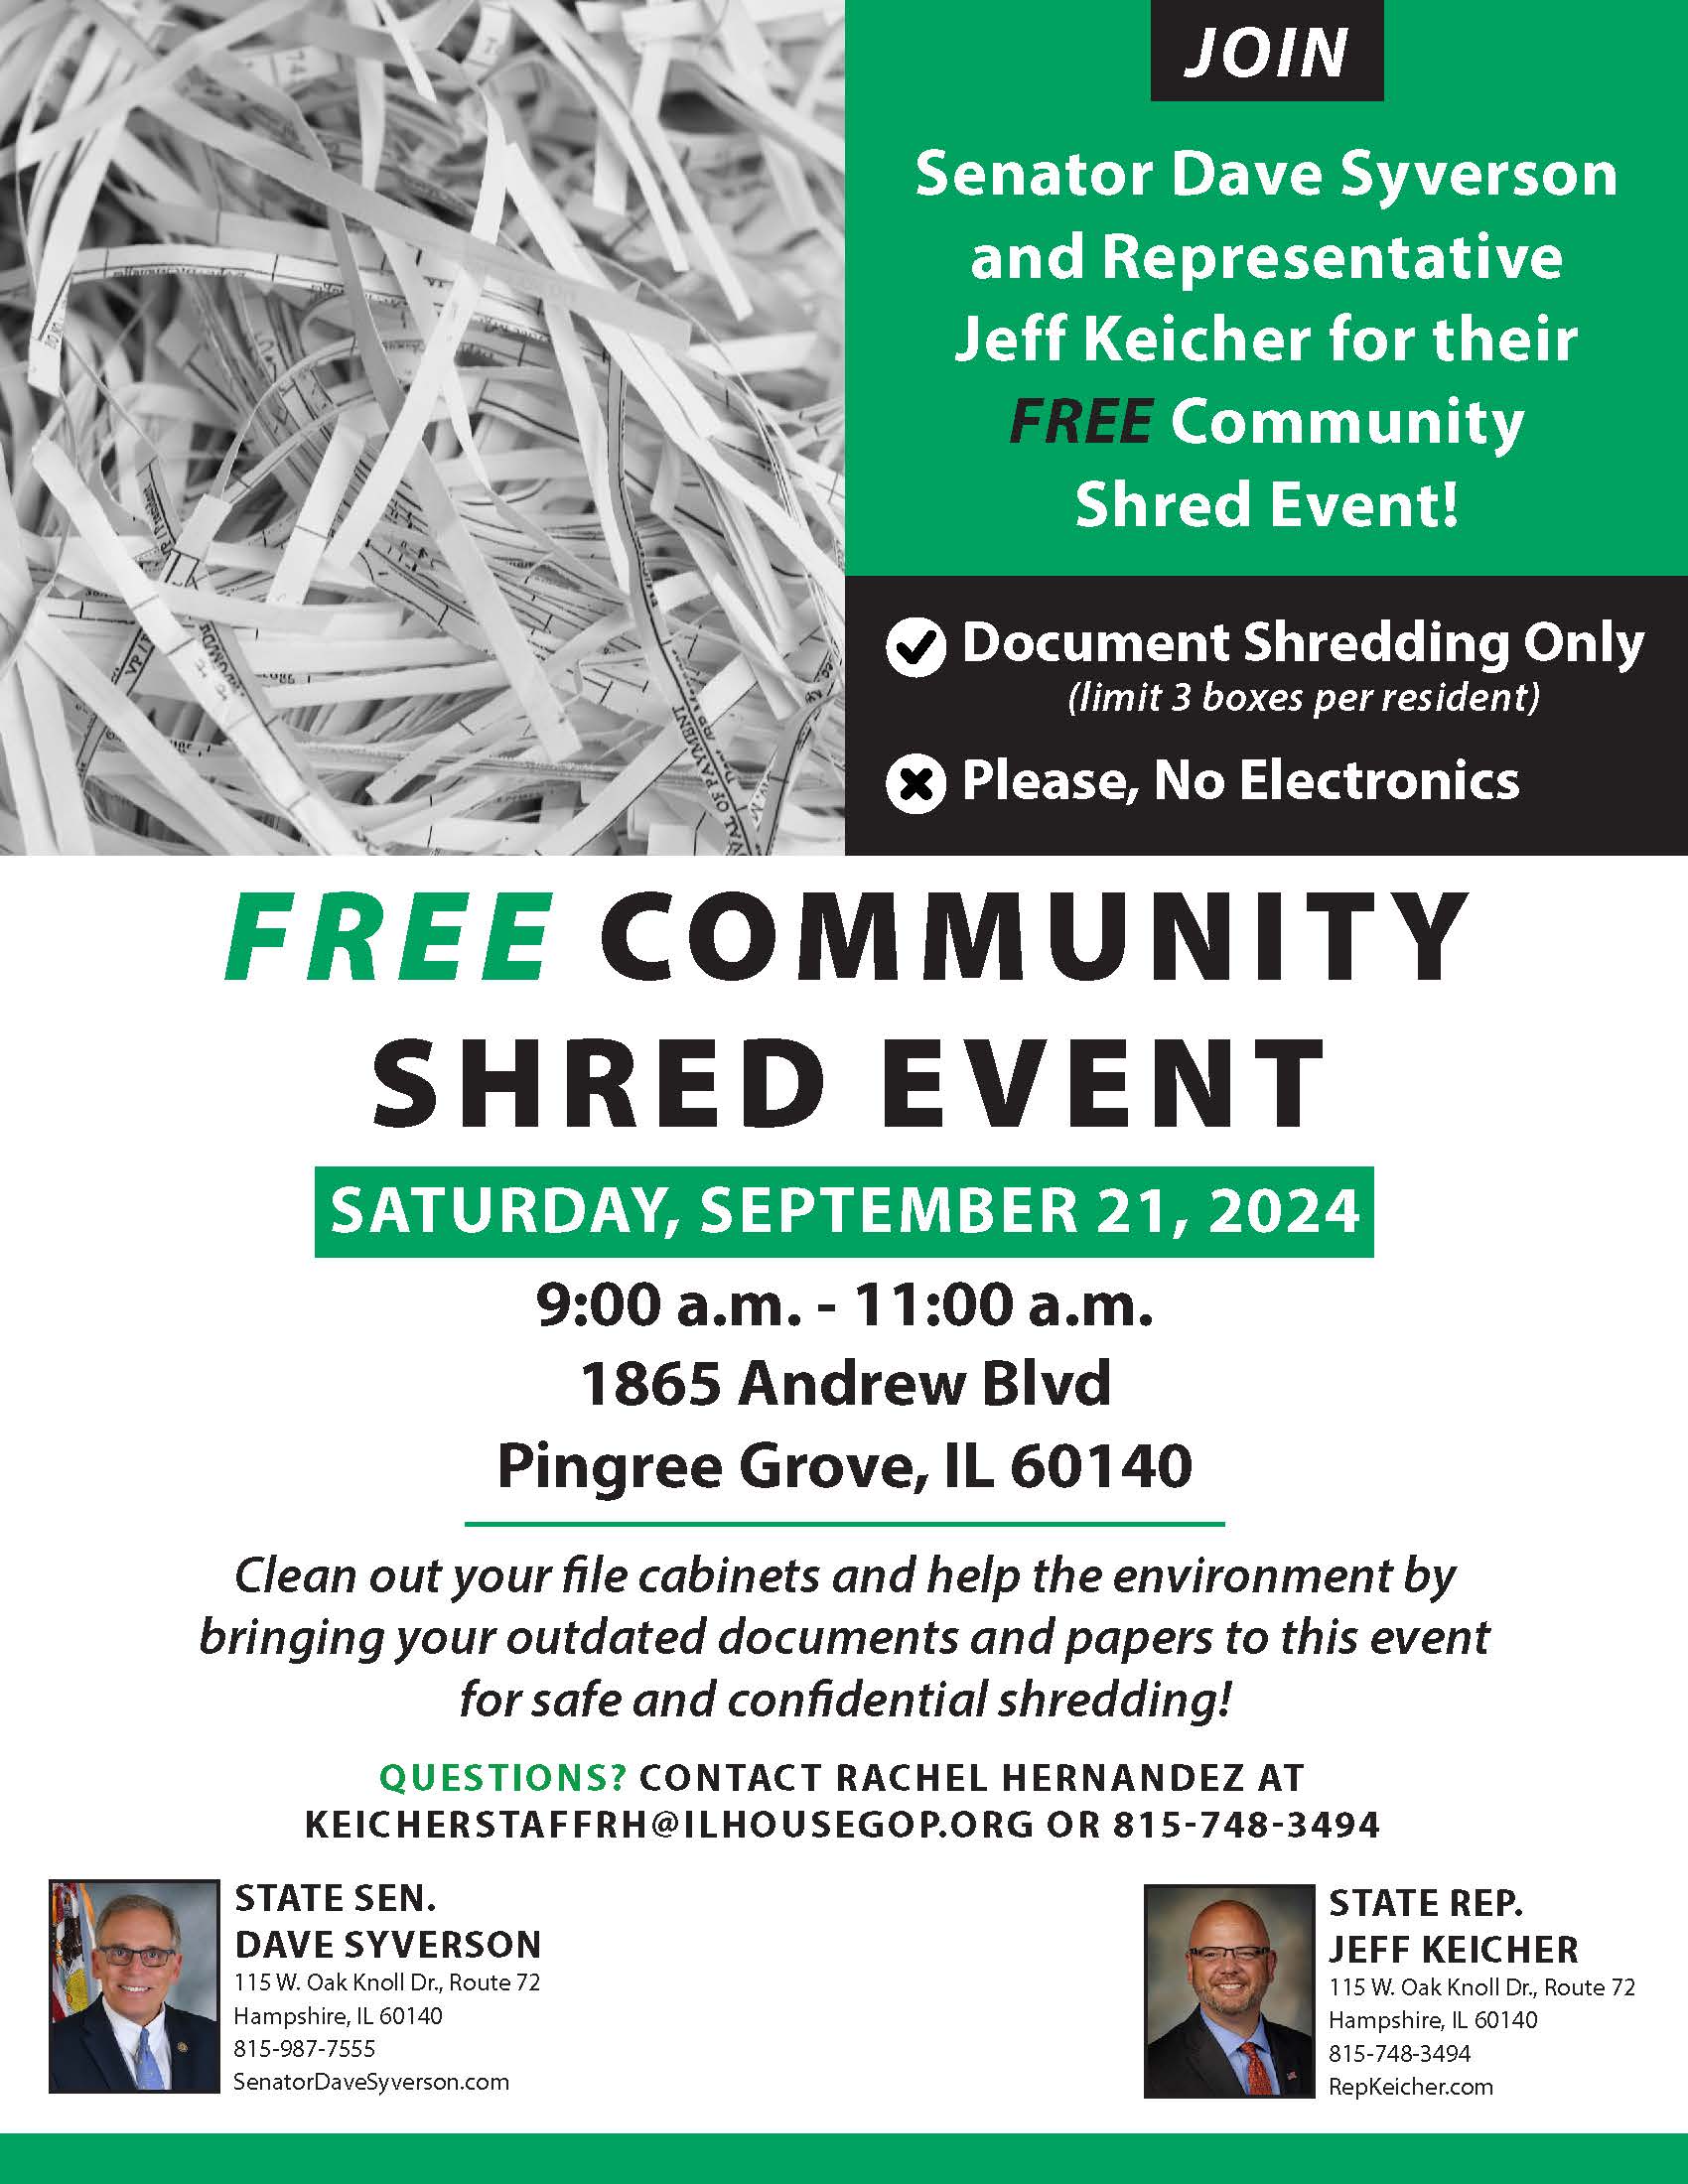 FREE Community Shred Event September 21 in Pingree Grove